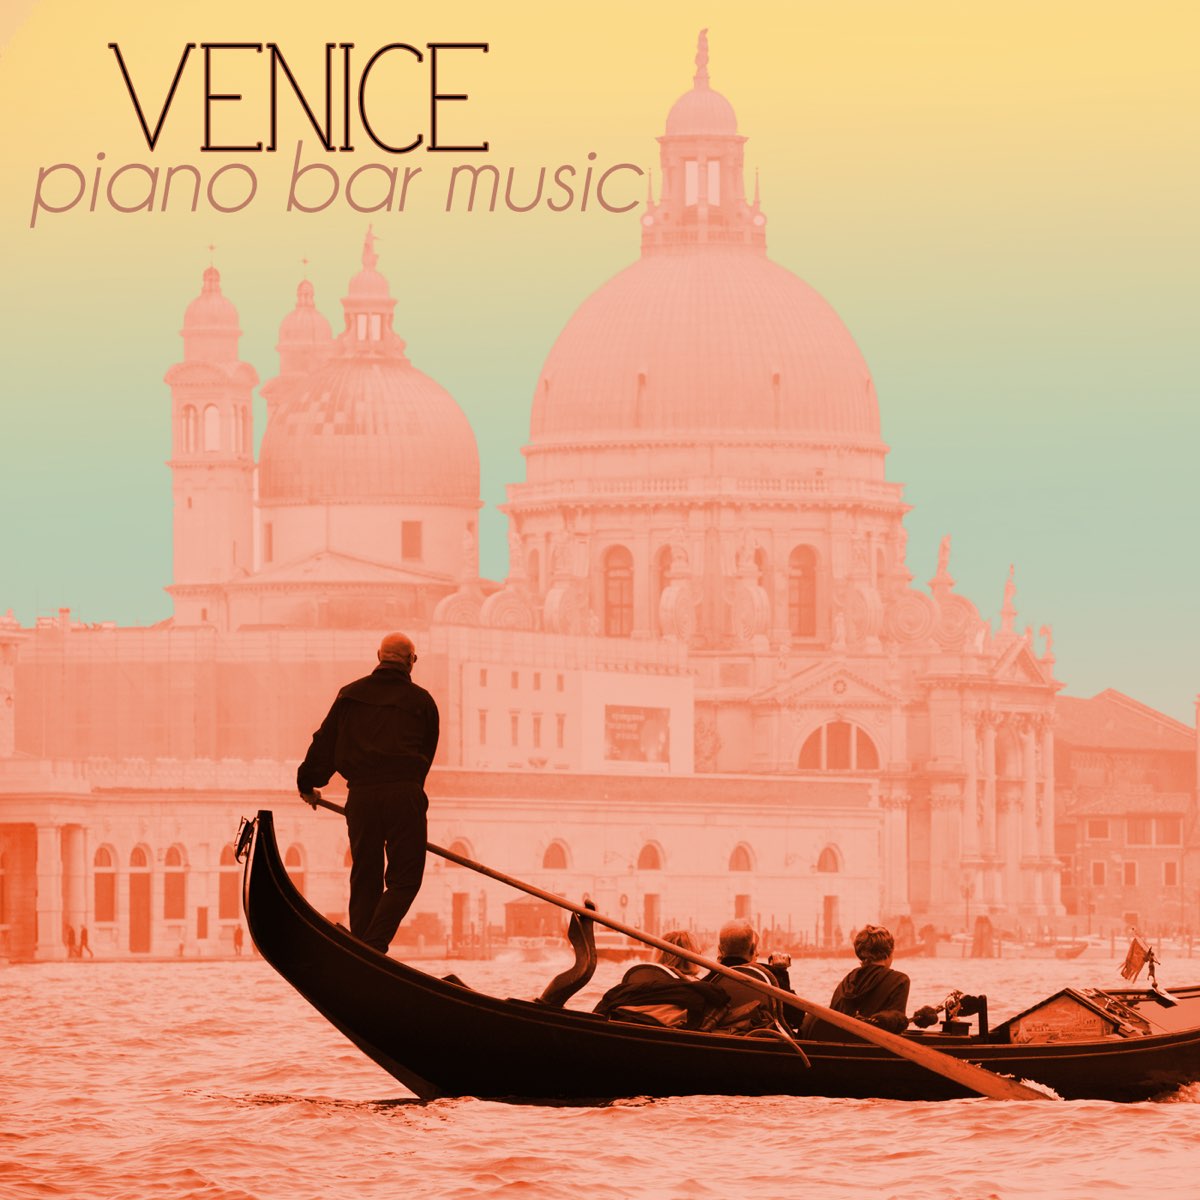 Venice Piano Bar Music - Italian Cocktail Party & Drinking Songs, Jazz Piano  Atmosphere Ambient Collection by Piano Bar Music Specialists on Apple Music